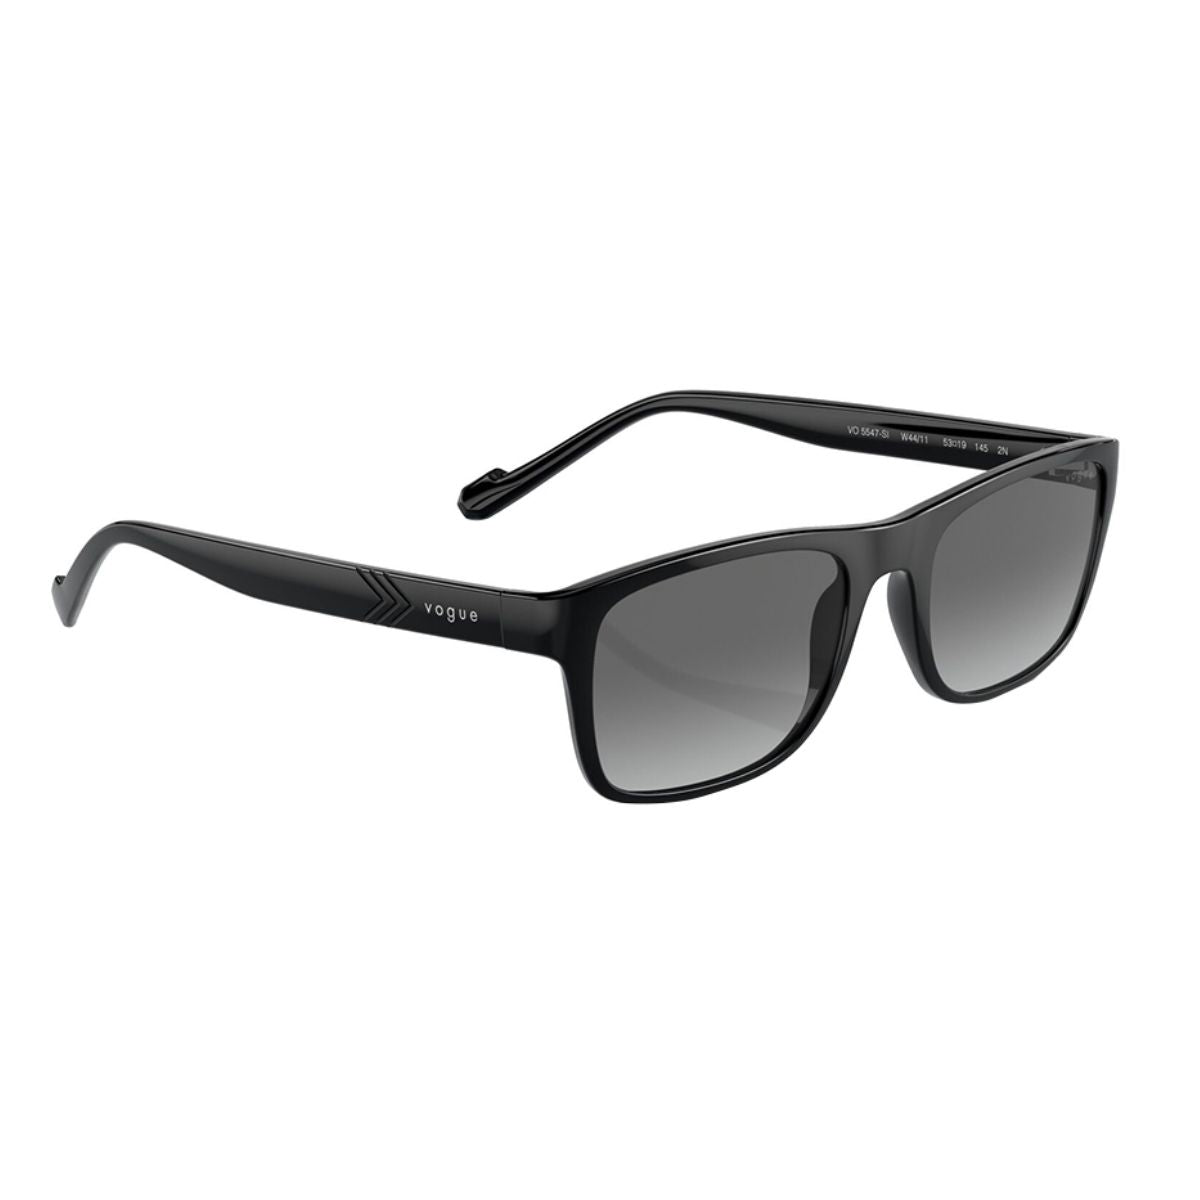 "Best UV Protection Vogue Sunglasses For Women's At Online Optorium"